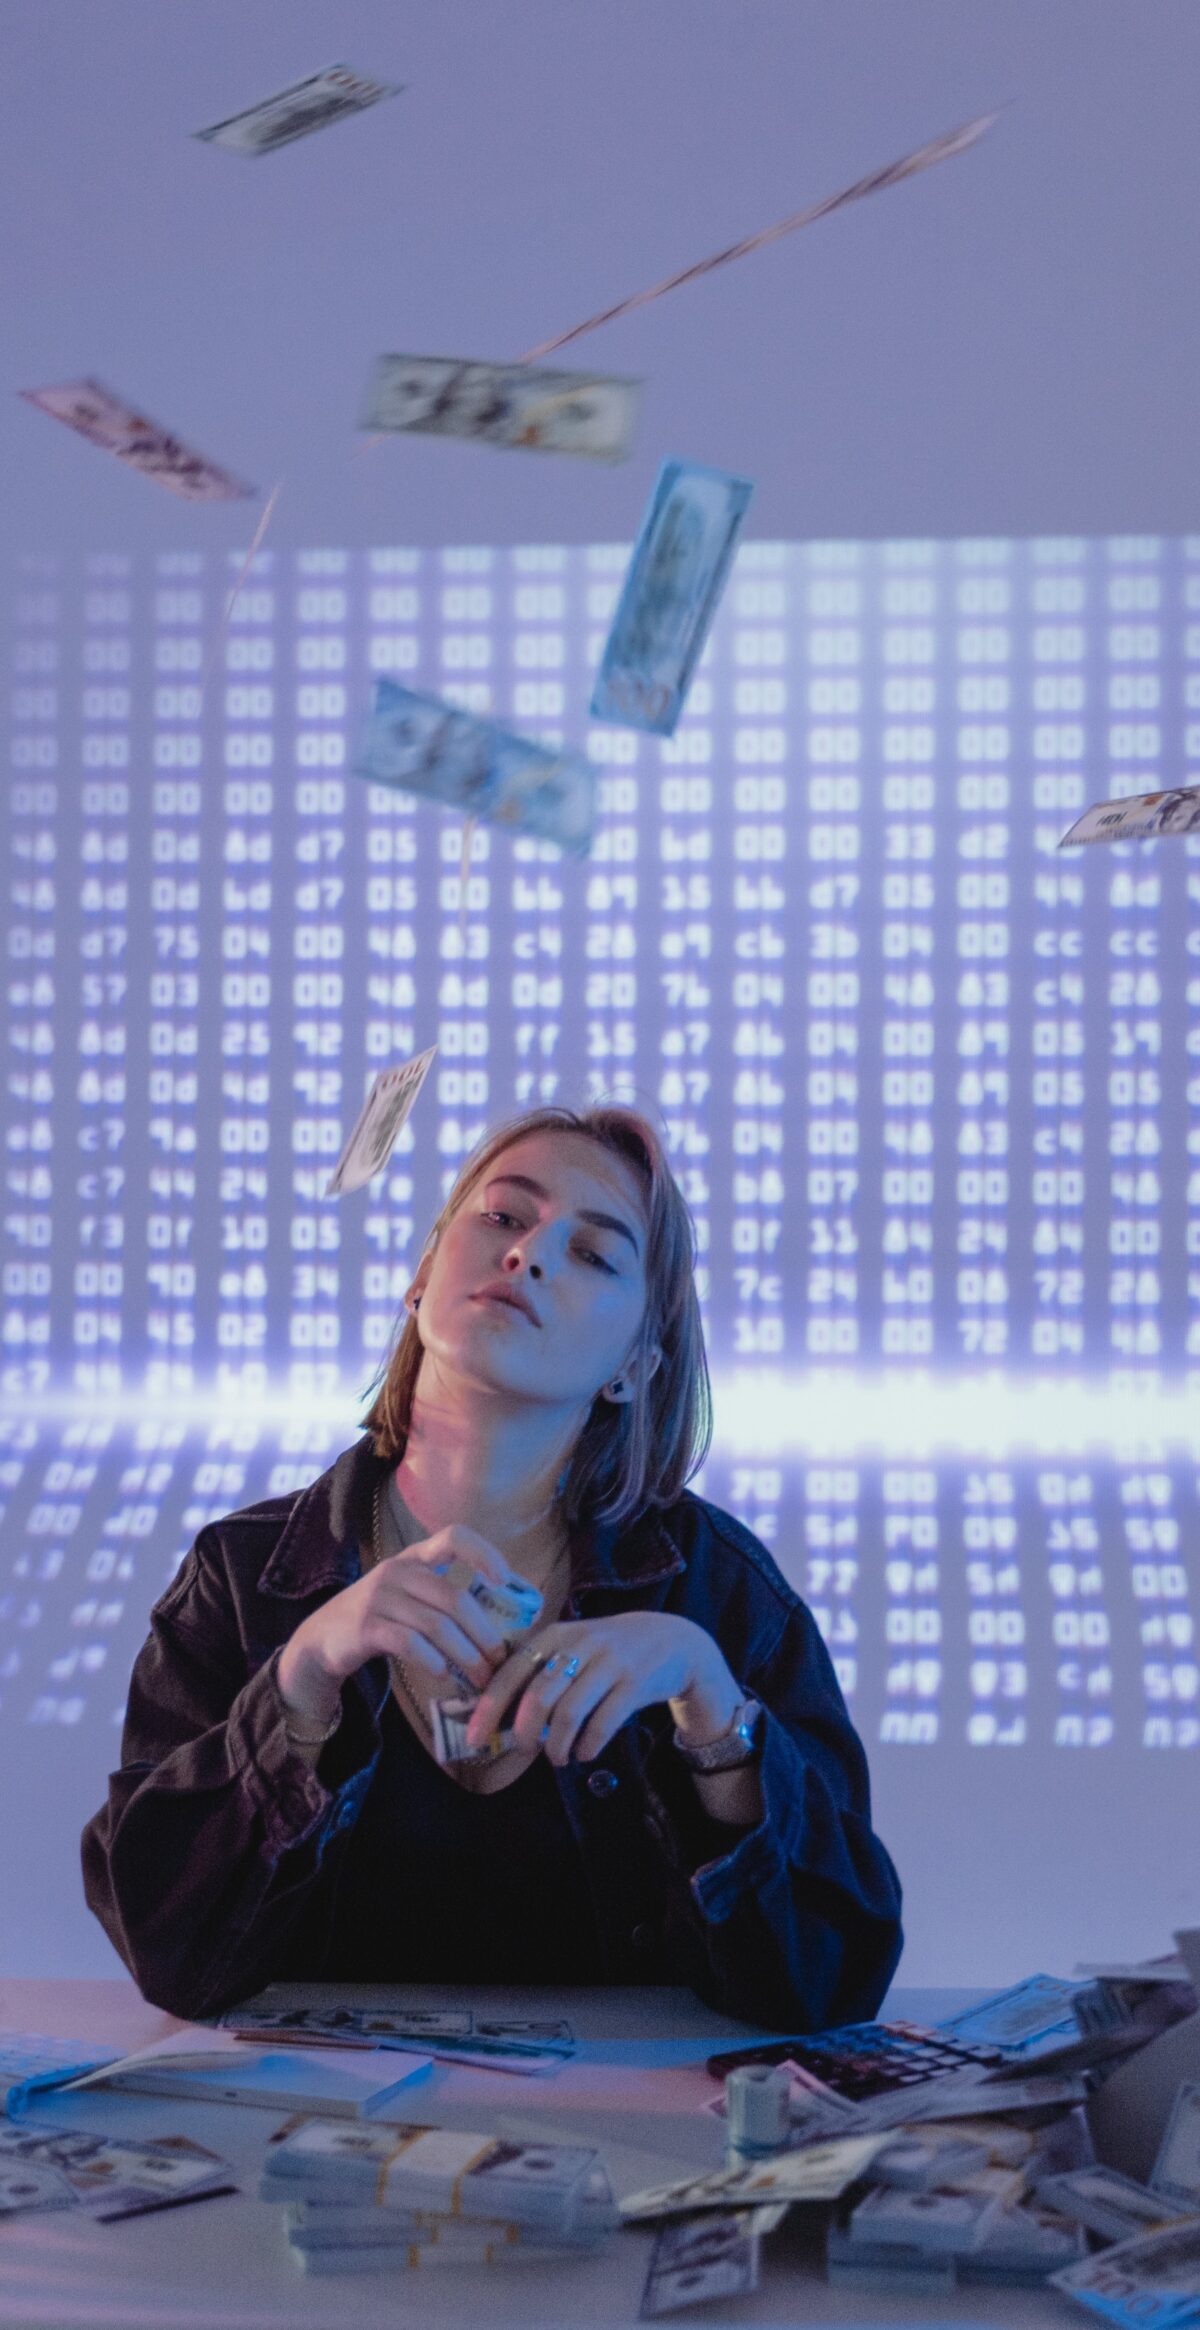 Woman sitting at desk with dollar bills on the desk and in the air.